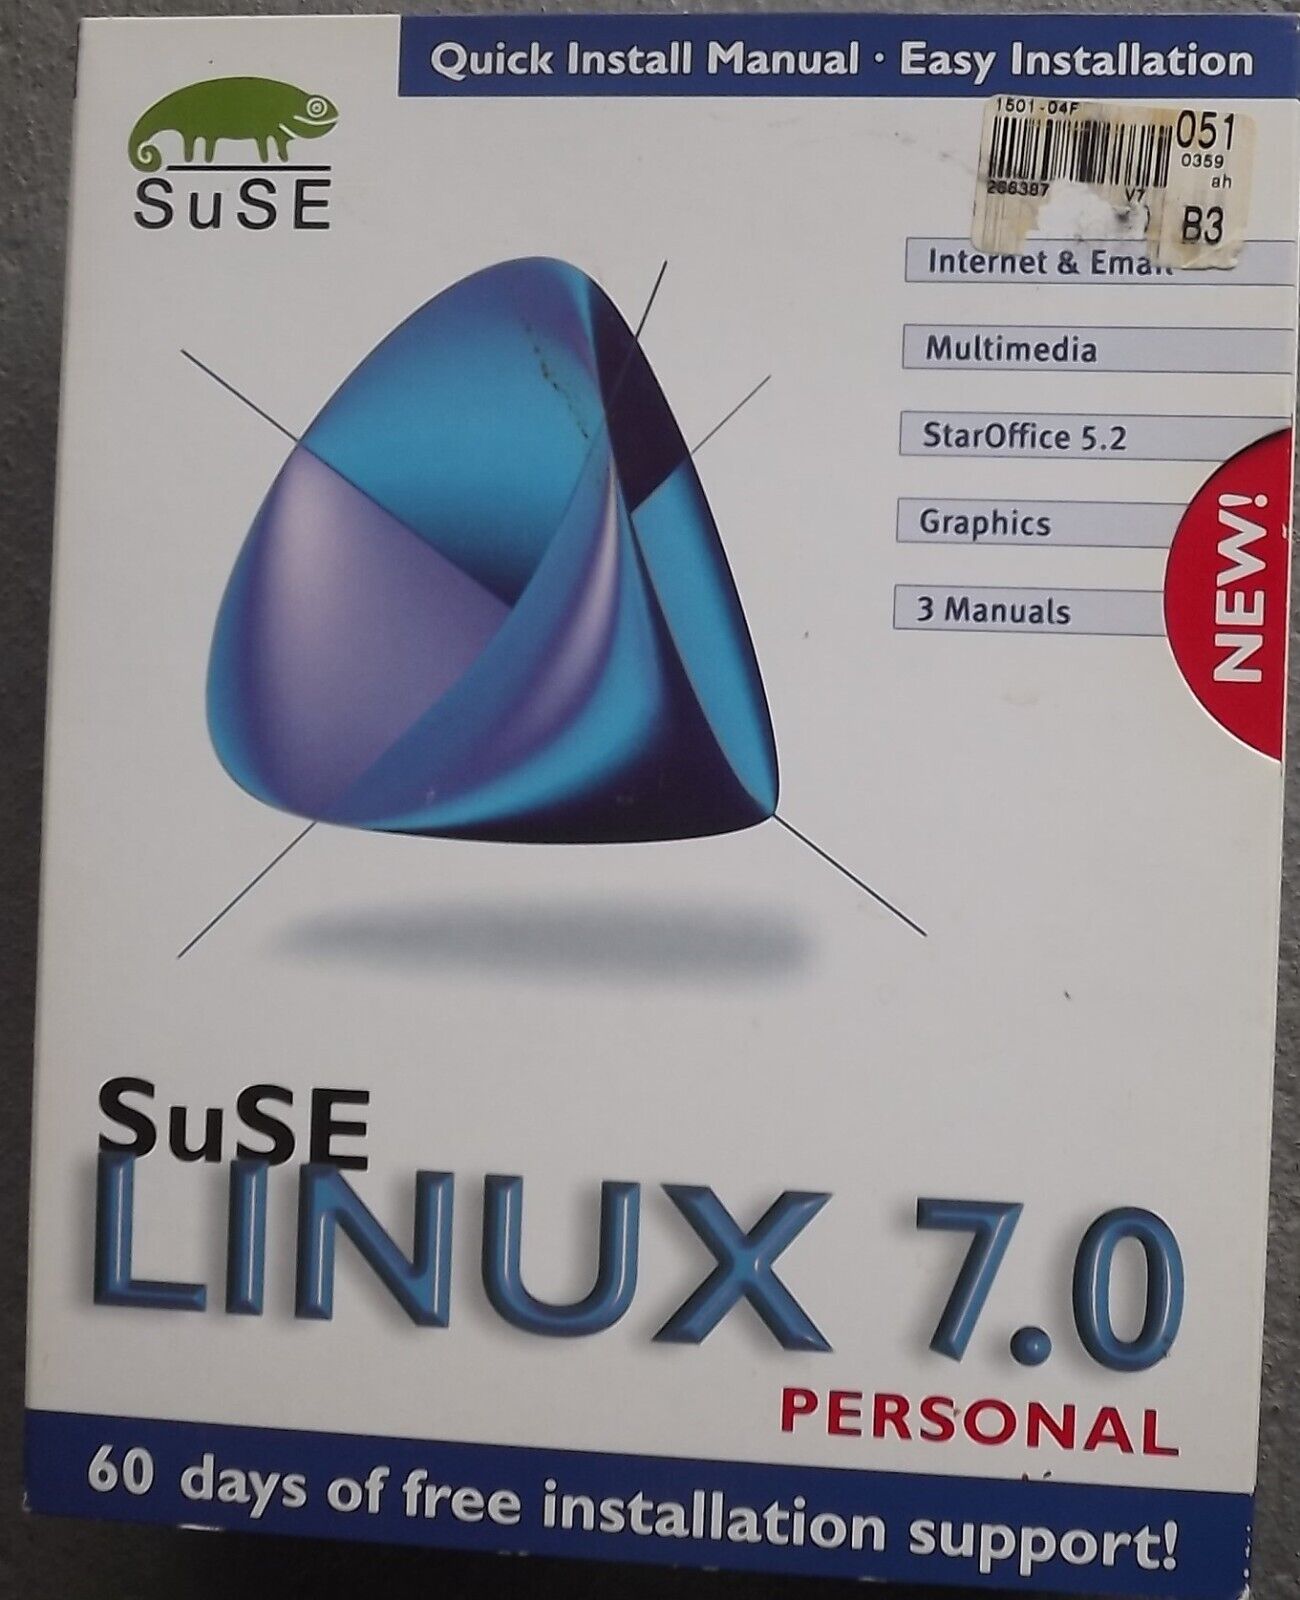 SuSE Linux 7.0 Personal Operating System